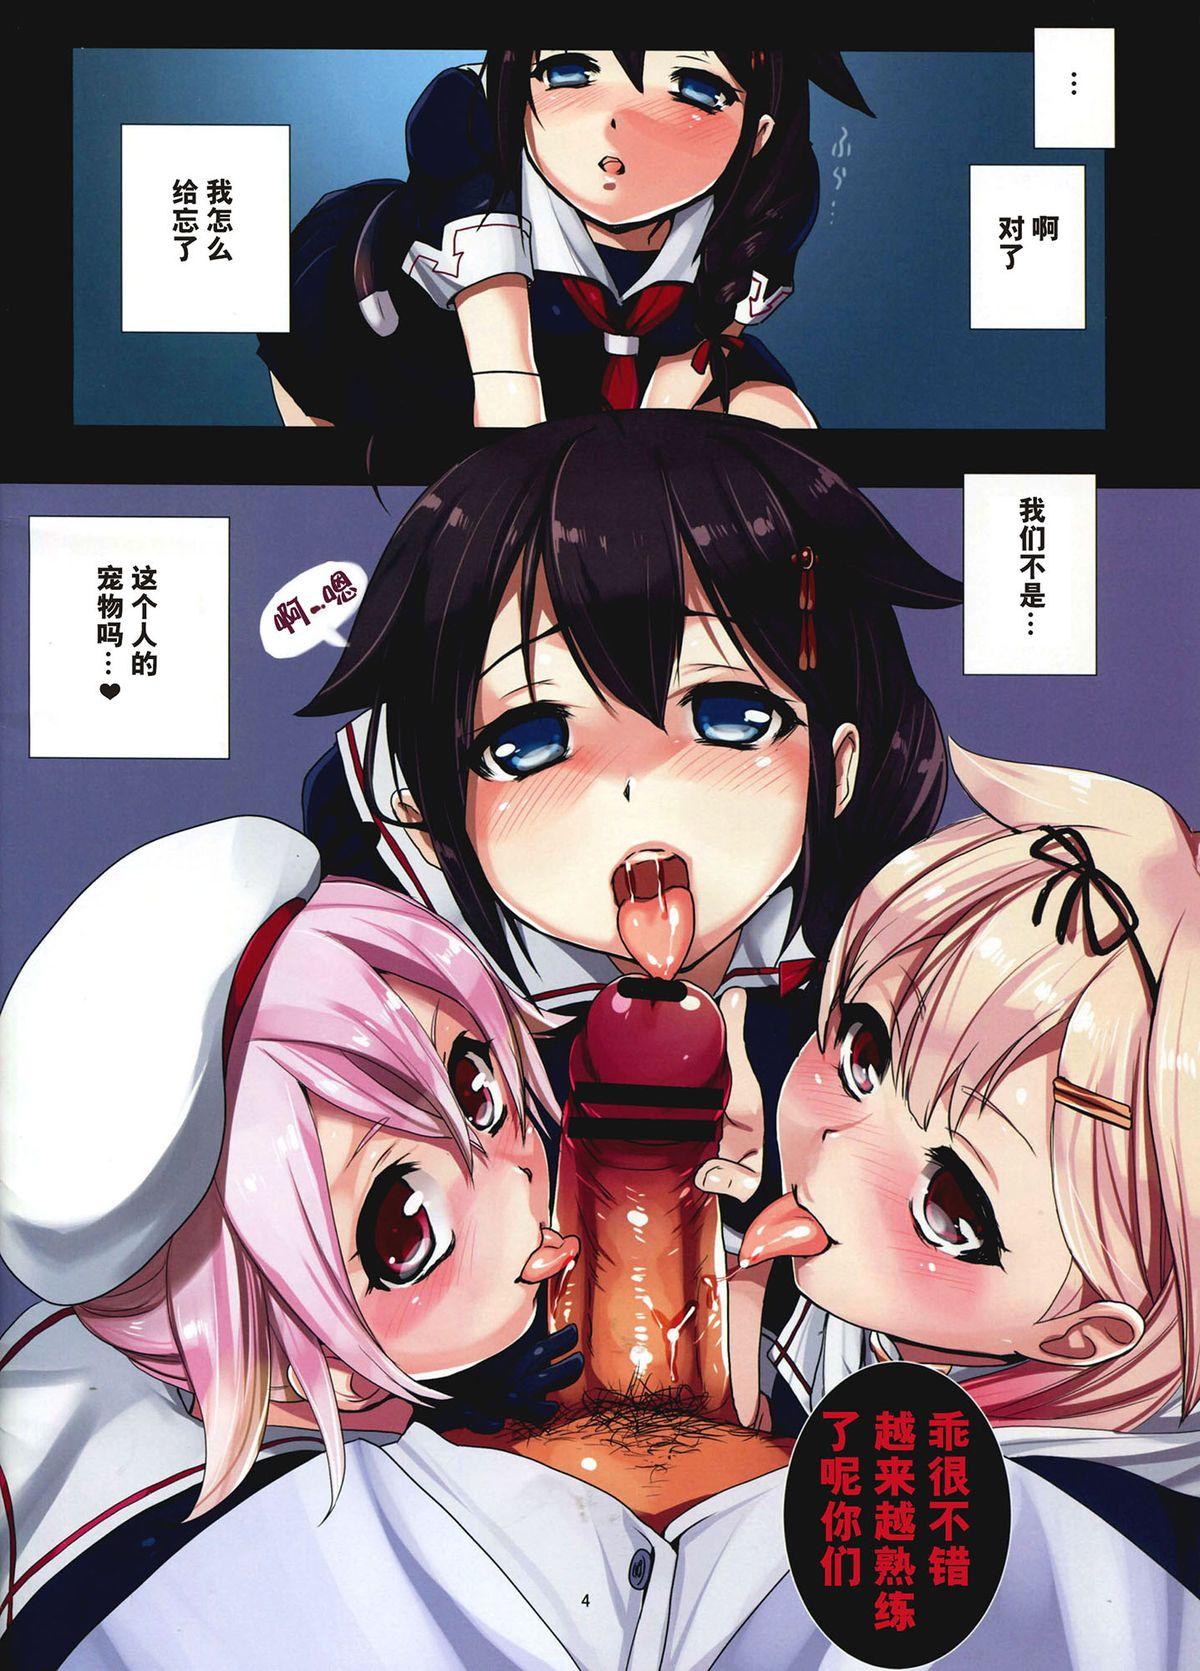 Nudist Haramase Collection 4 - Kantai collection Lesbian Porn - Page 5